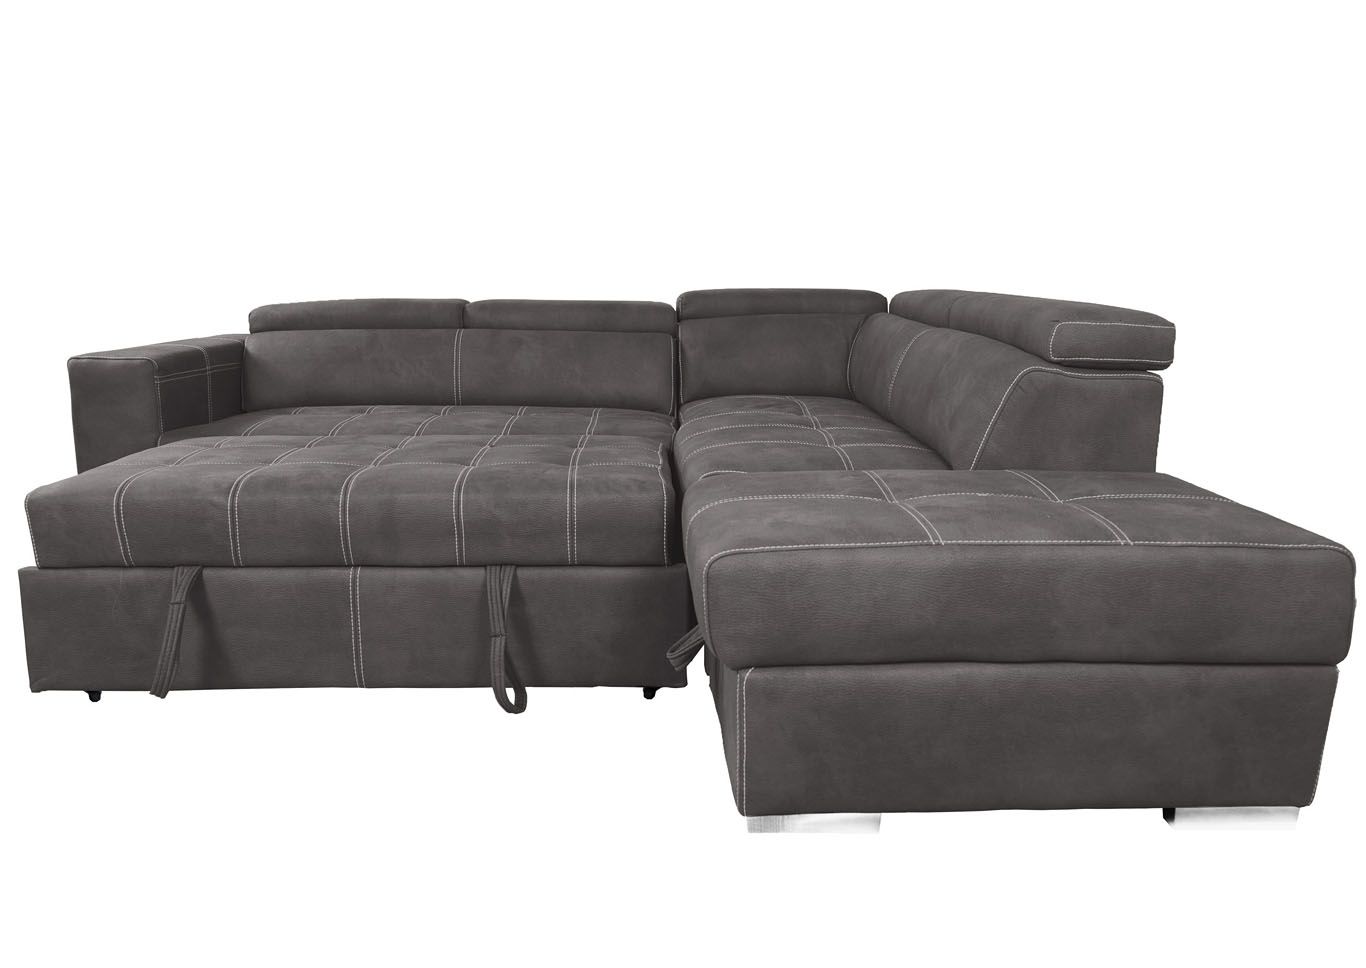 Abby Media Sectional with Pull Out Pop Up Ottoman and Moveable Storage Ottoman,Instore